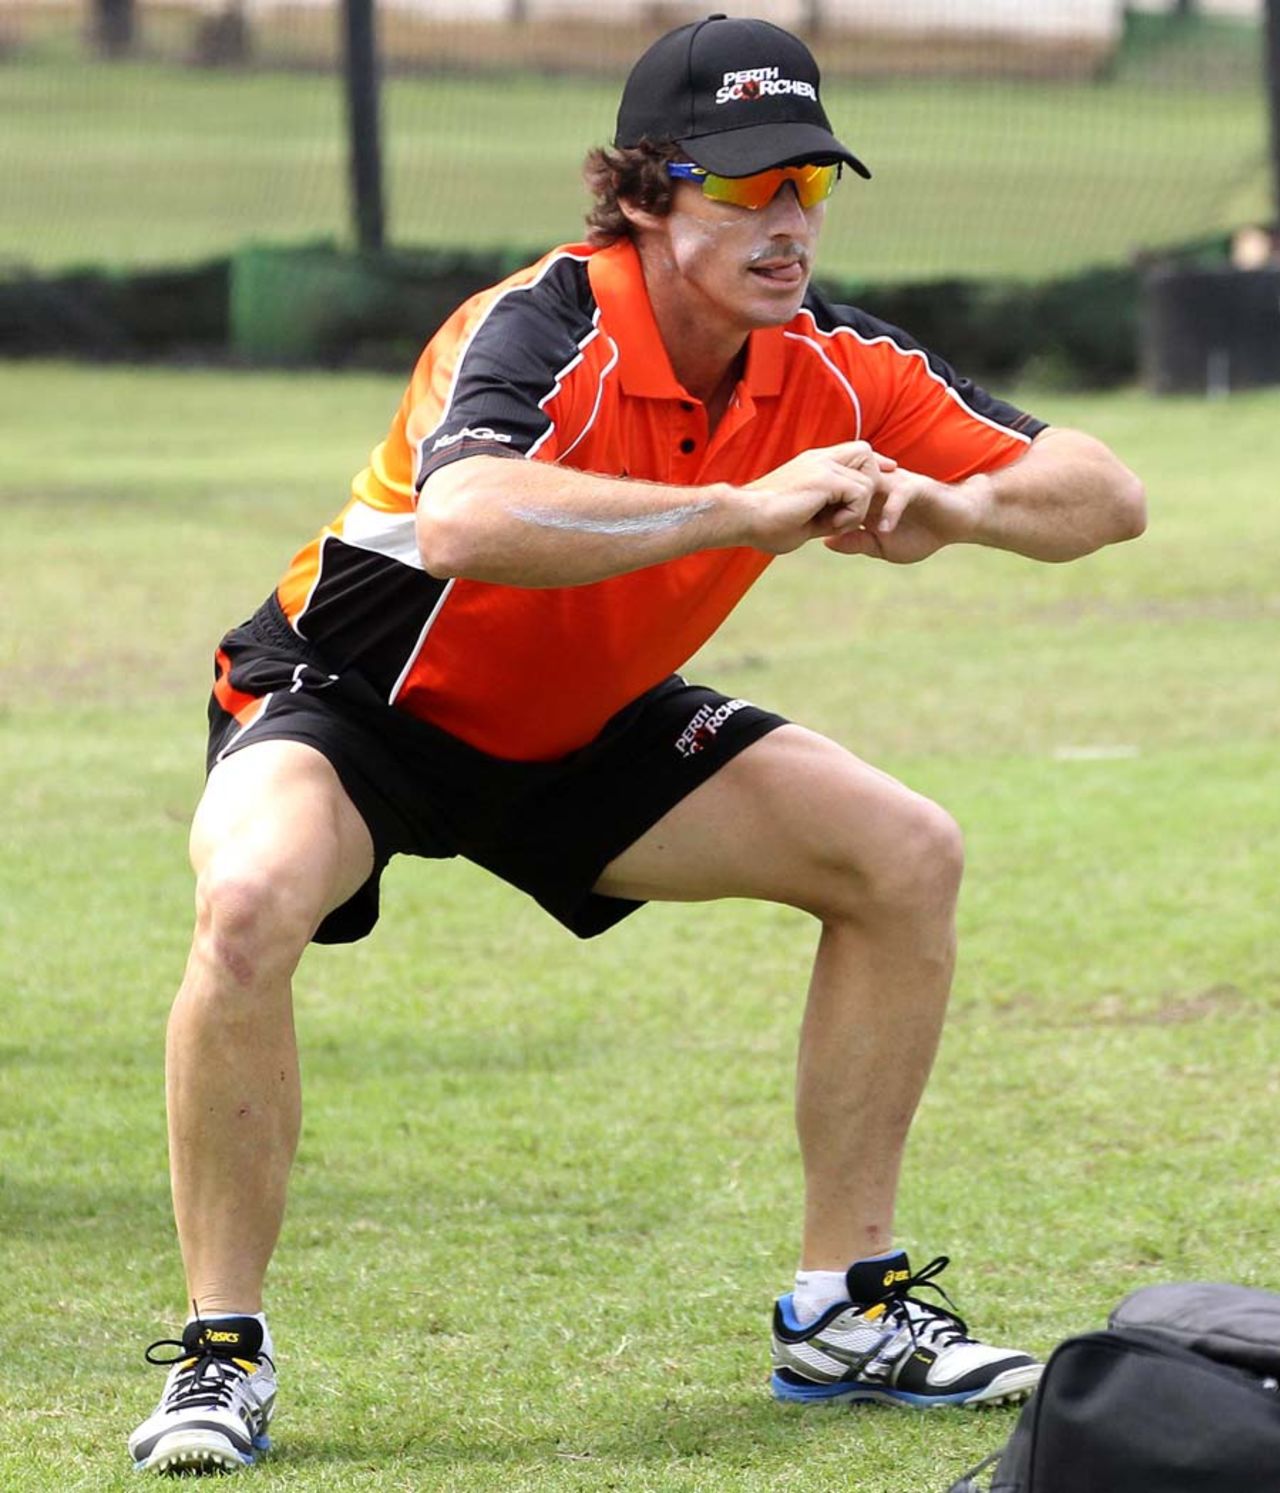 Perth Scorchers' Brad Hogg at a practice session, Durban, October 15, 2012